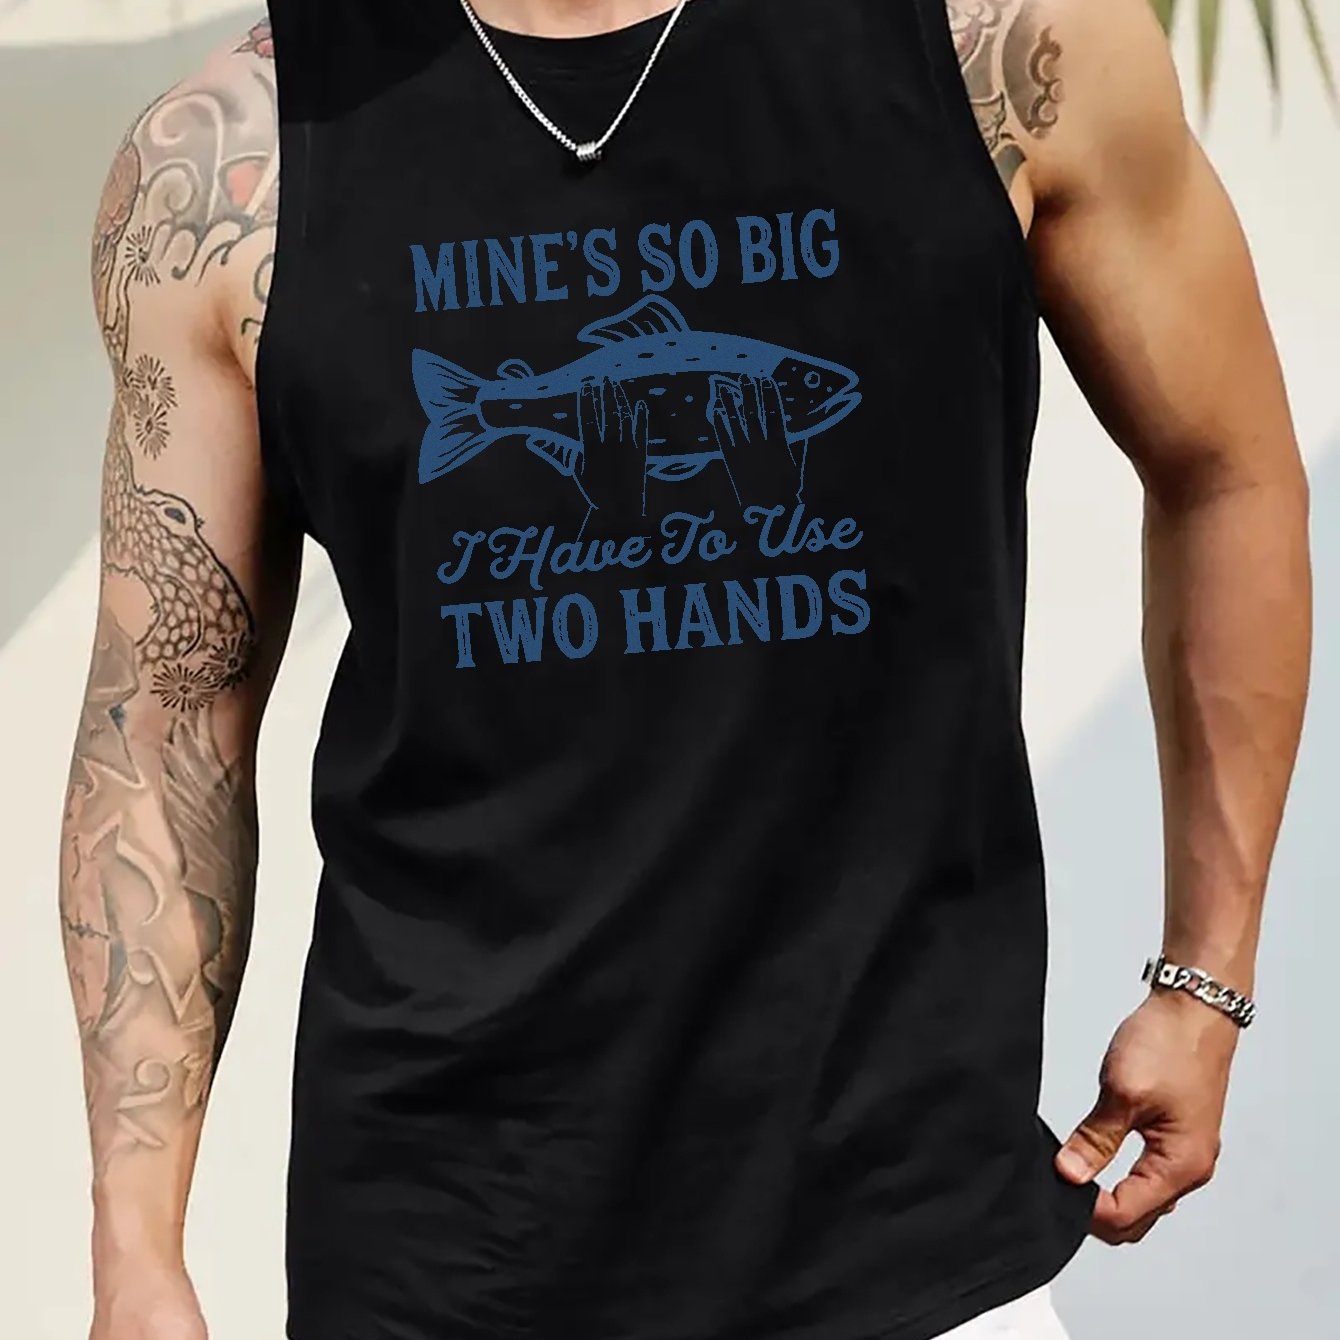 Plus Size Men's Fish In Hands Graphic Print Tank Top For Sports/fitness,  Summer Trendy Sleeveless Tees Oversized Tops For Males, Men Clothing